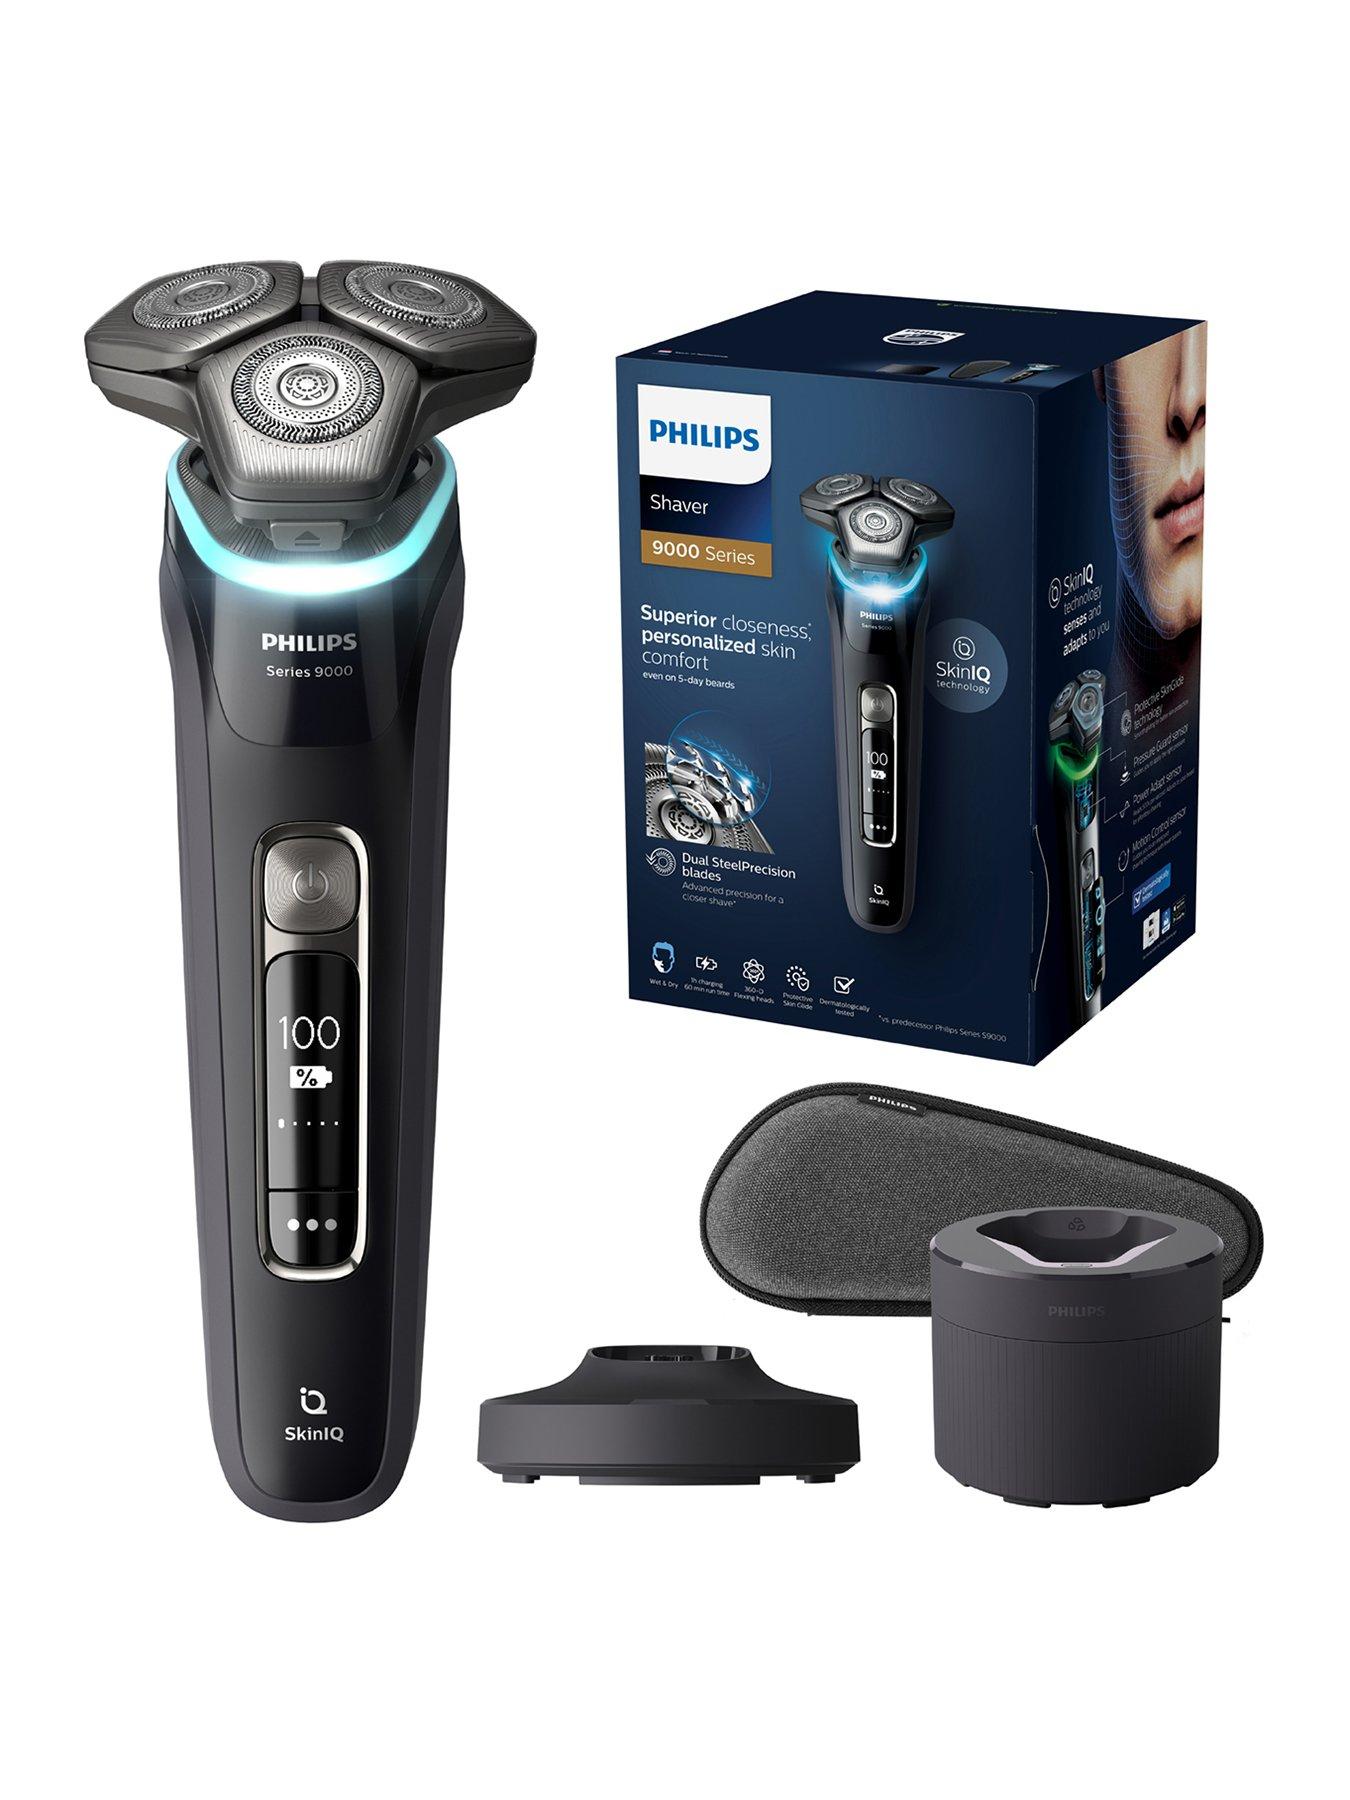 Braun Series 3 ProSkin 3000s Electric Shaver, Black - Rechargeable Electric  Razor